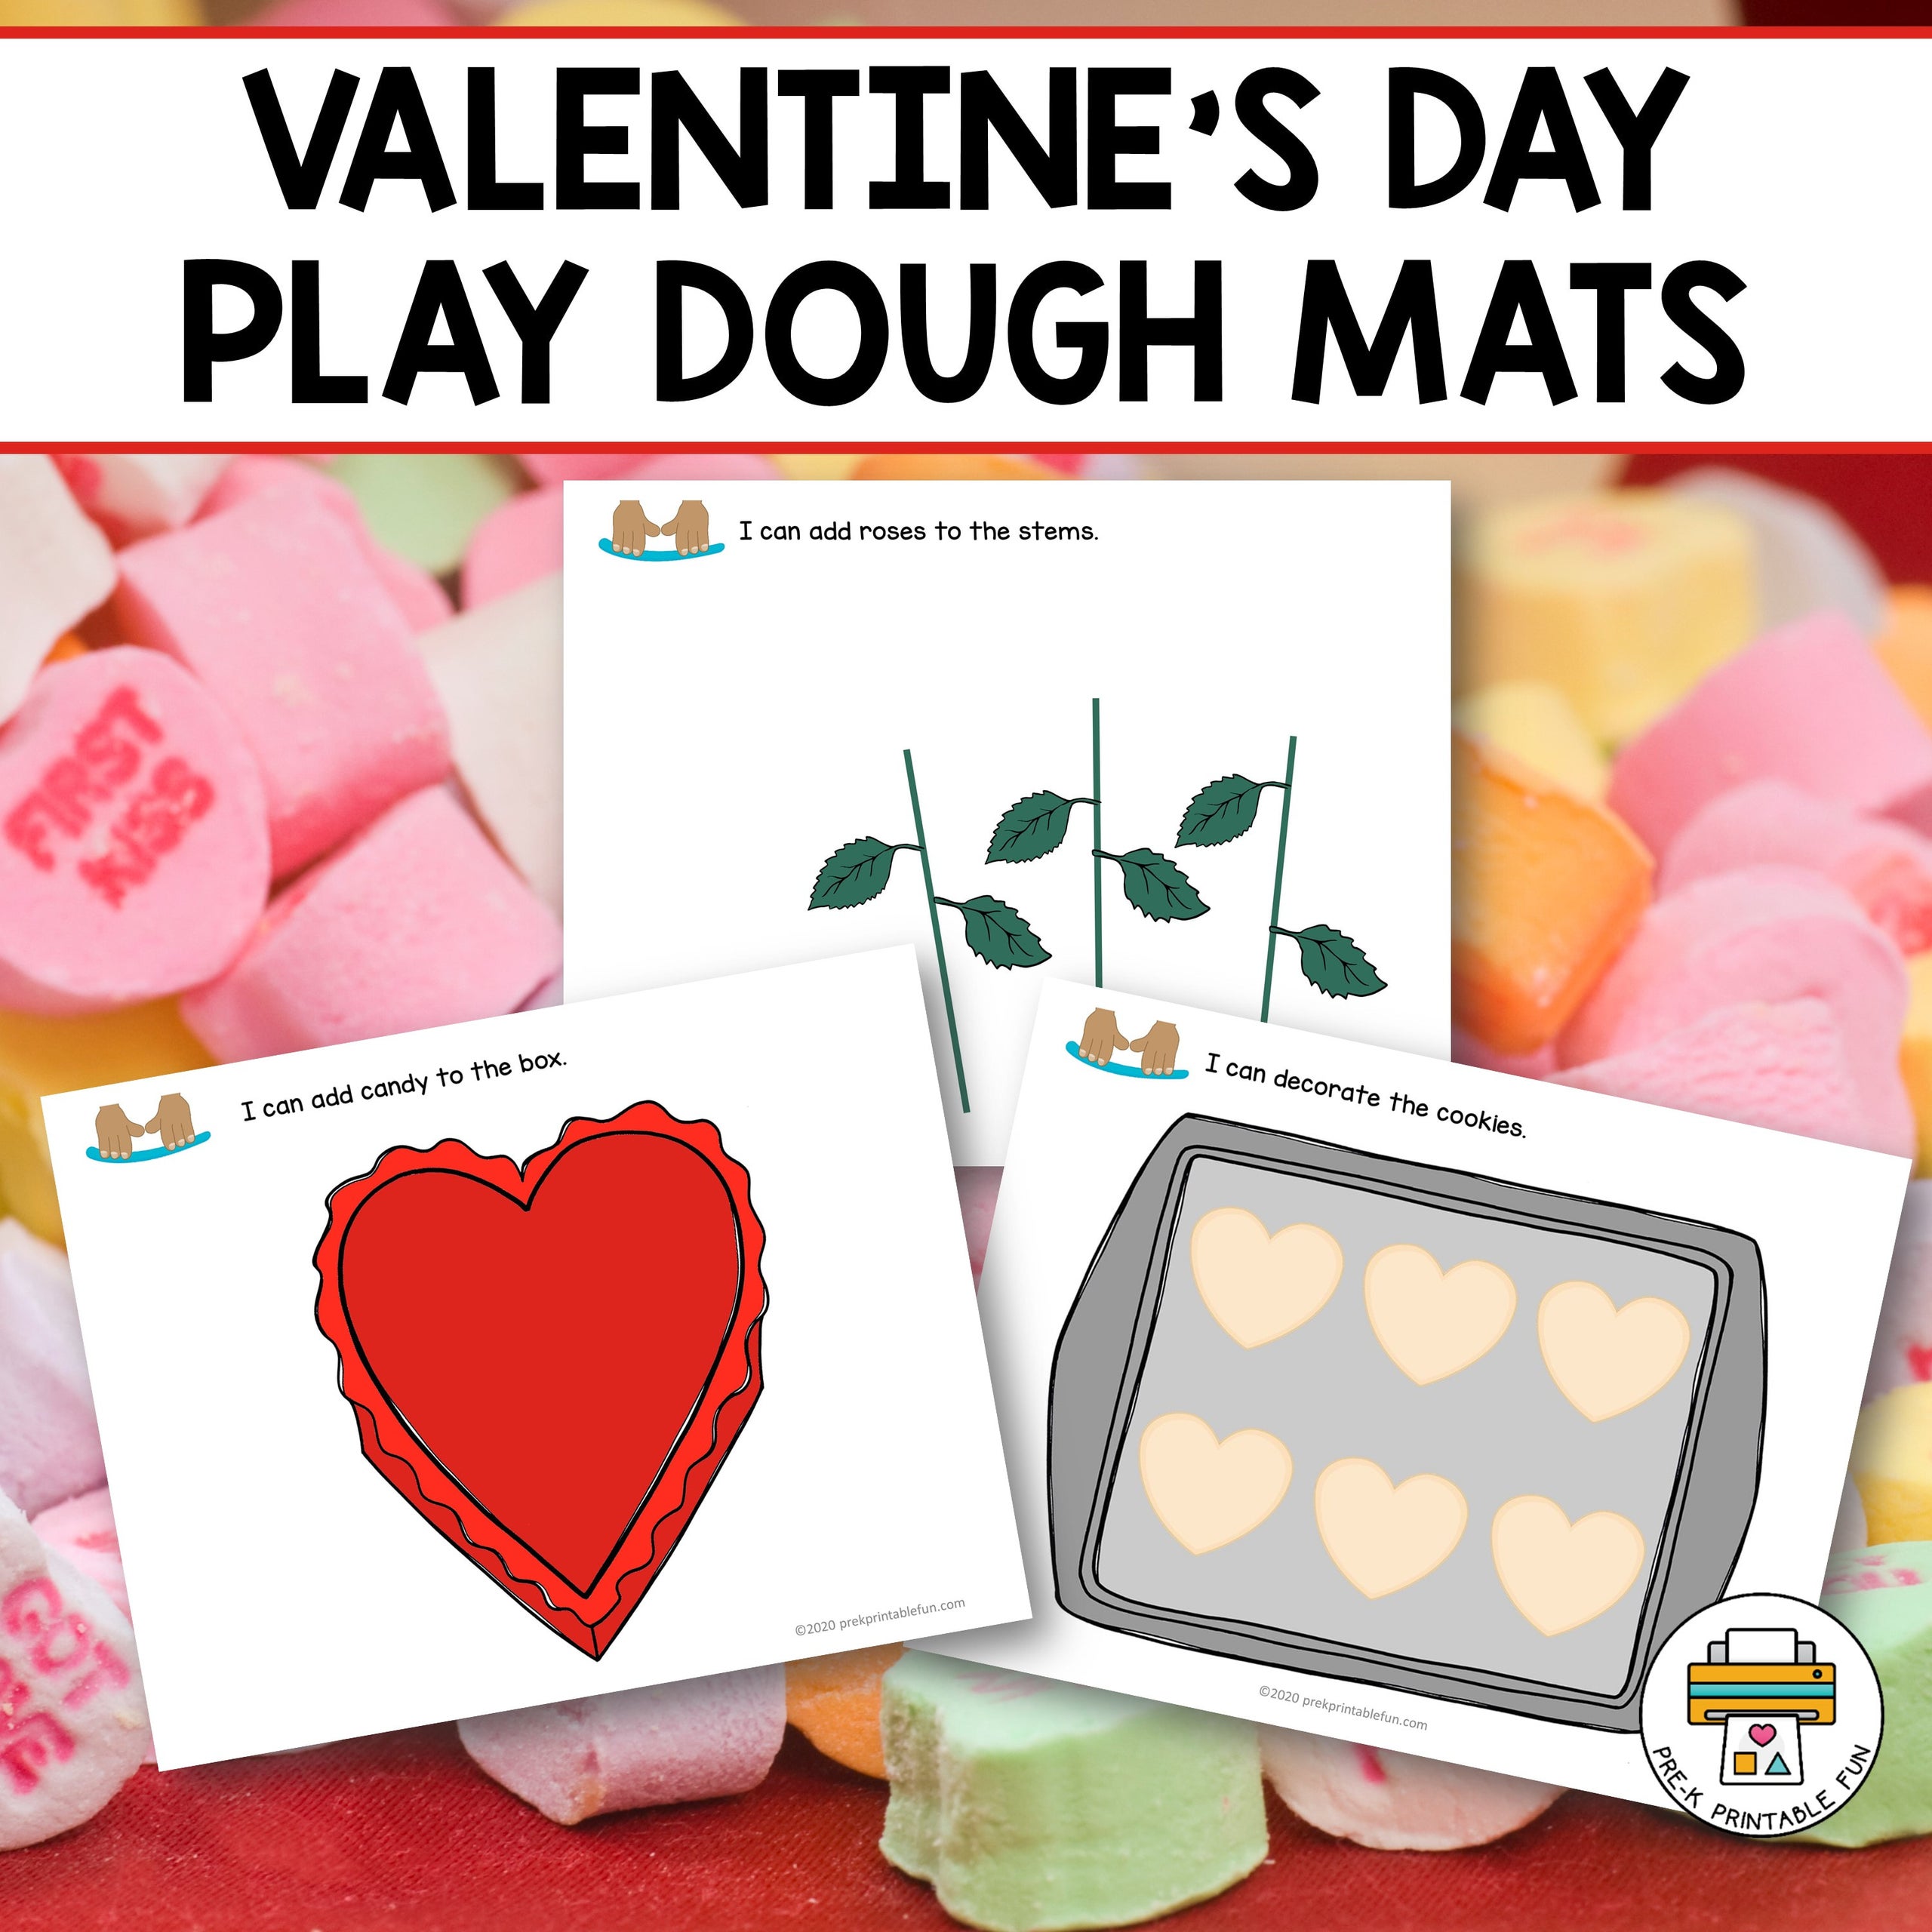 Valentines Day Play Dough Mats